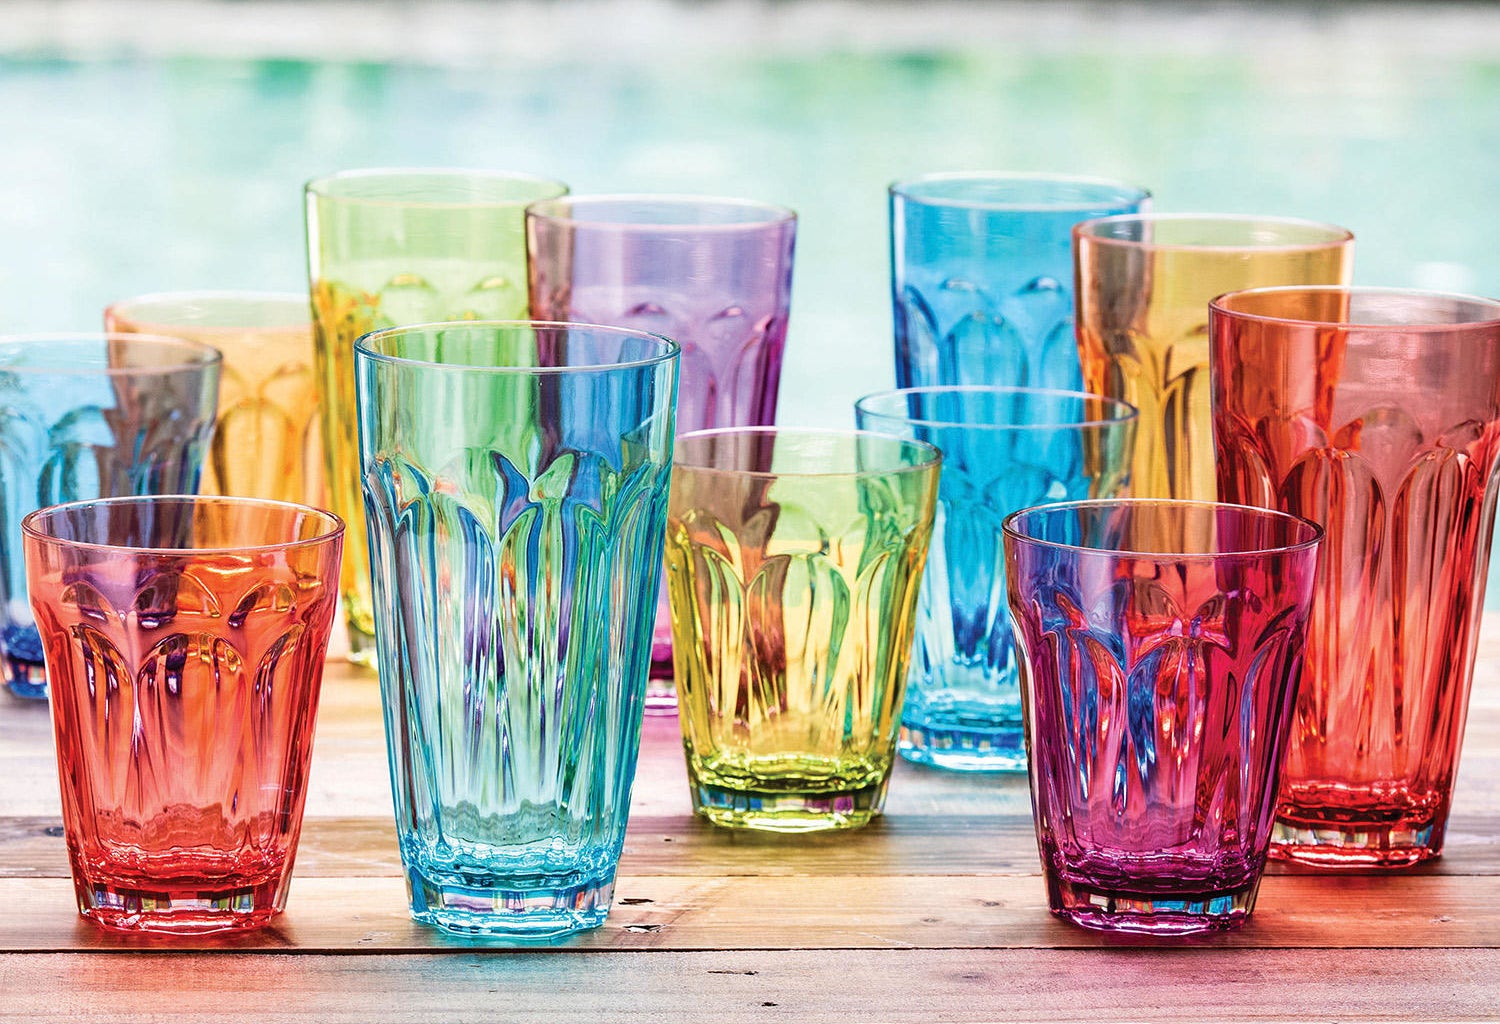 the colorful cups